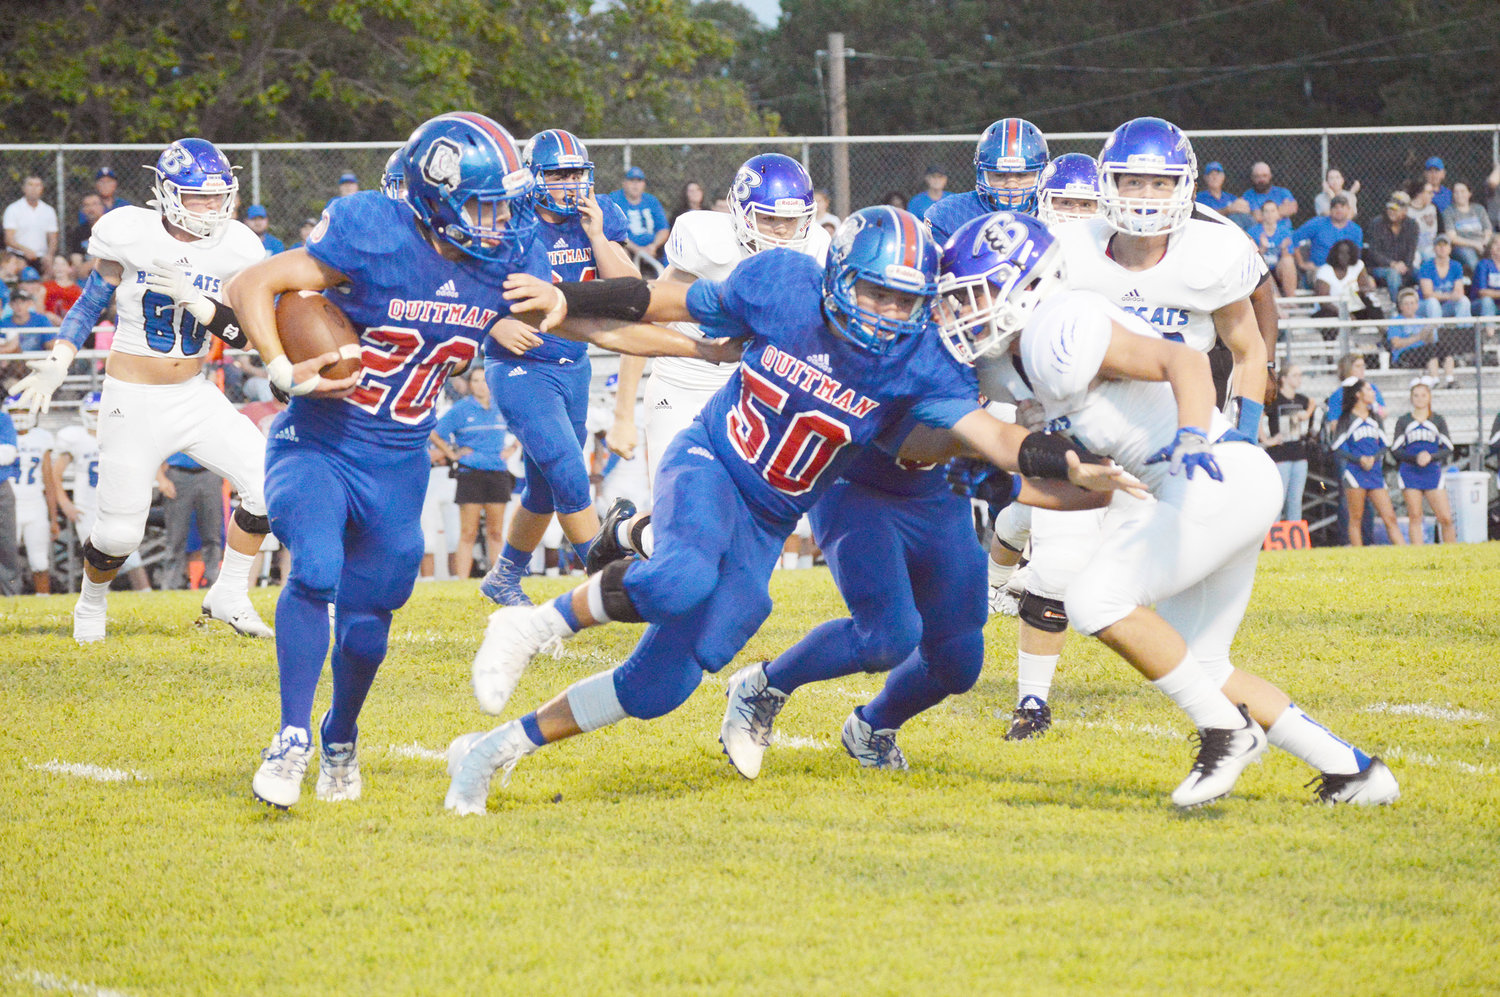 Quitman’s Teague Stewart (50) leads the way for Bulldog running back Kayden White. (Monitor photo by Larry Tucker)